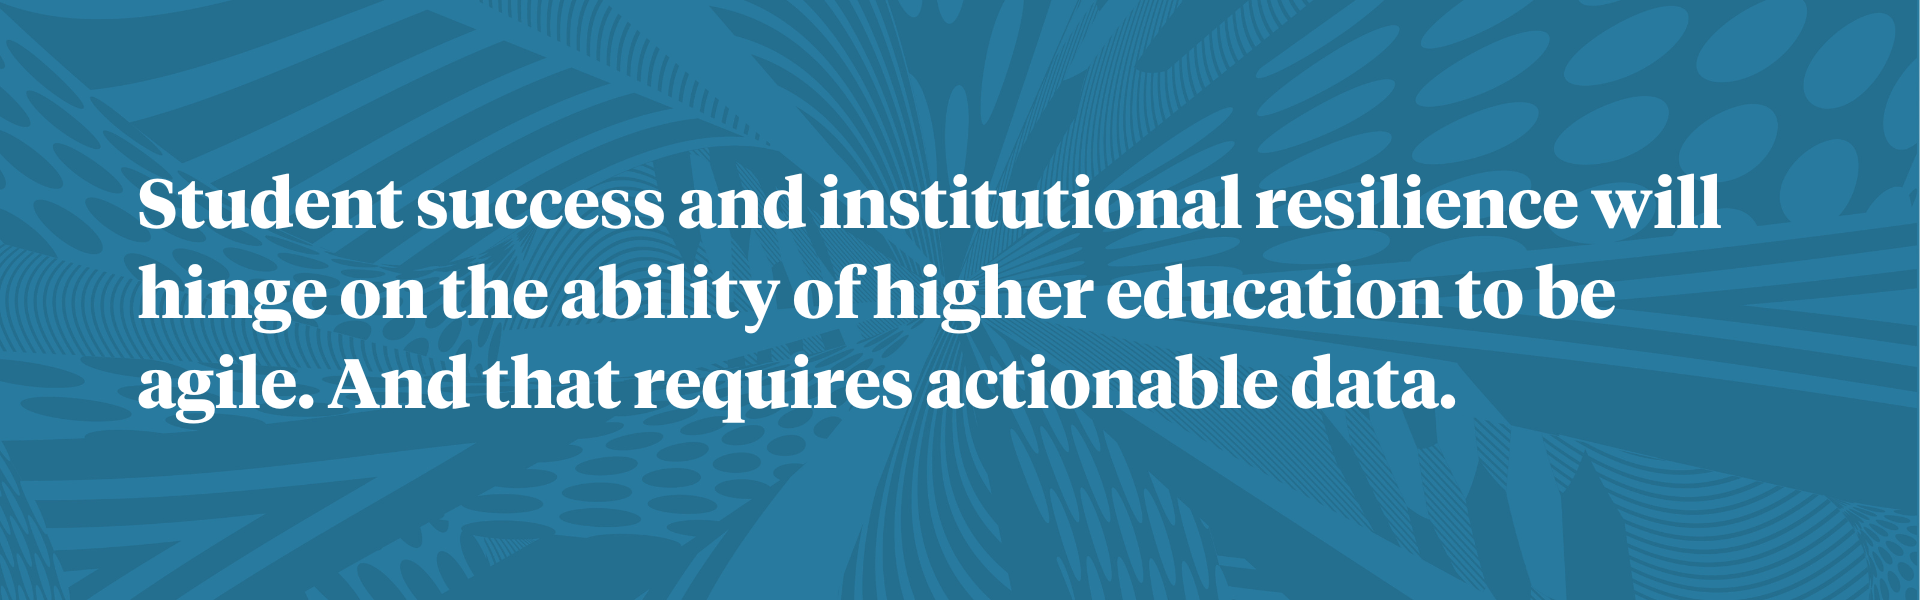 2. Student success and institutional resilience will hinge on the ability of higher education to be agile. And that requires actionable data.